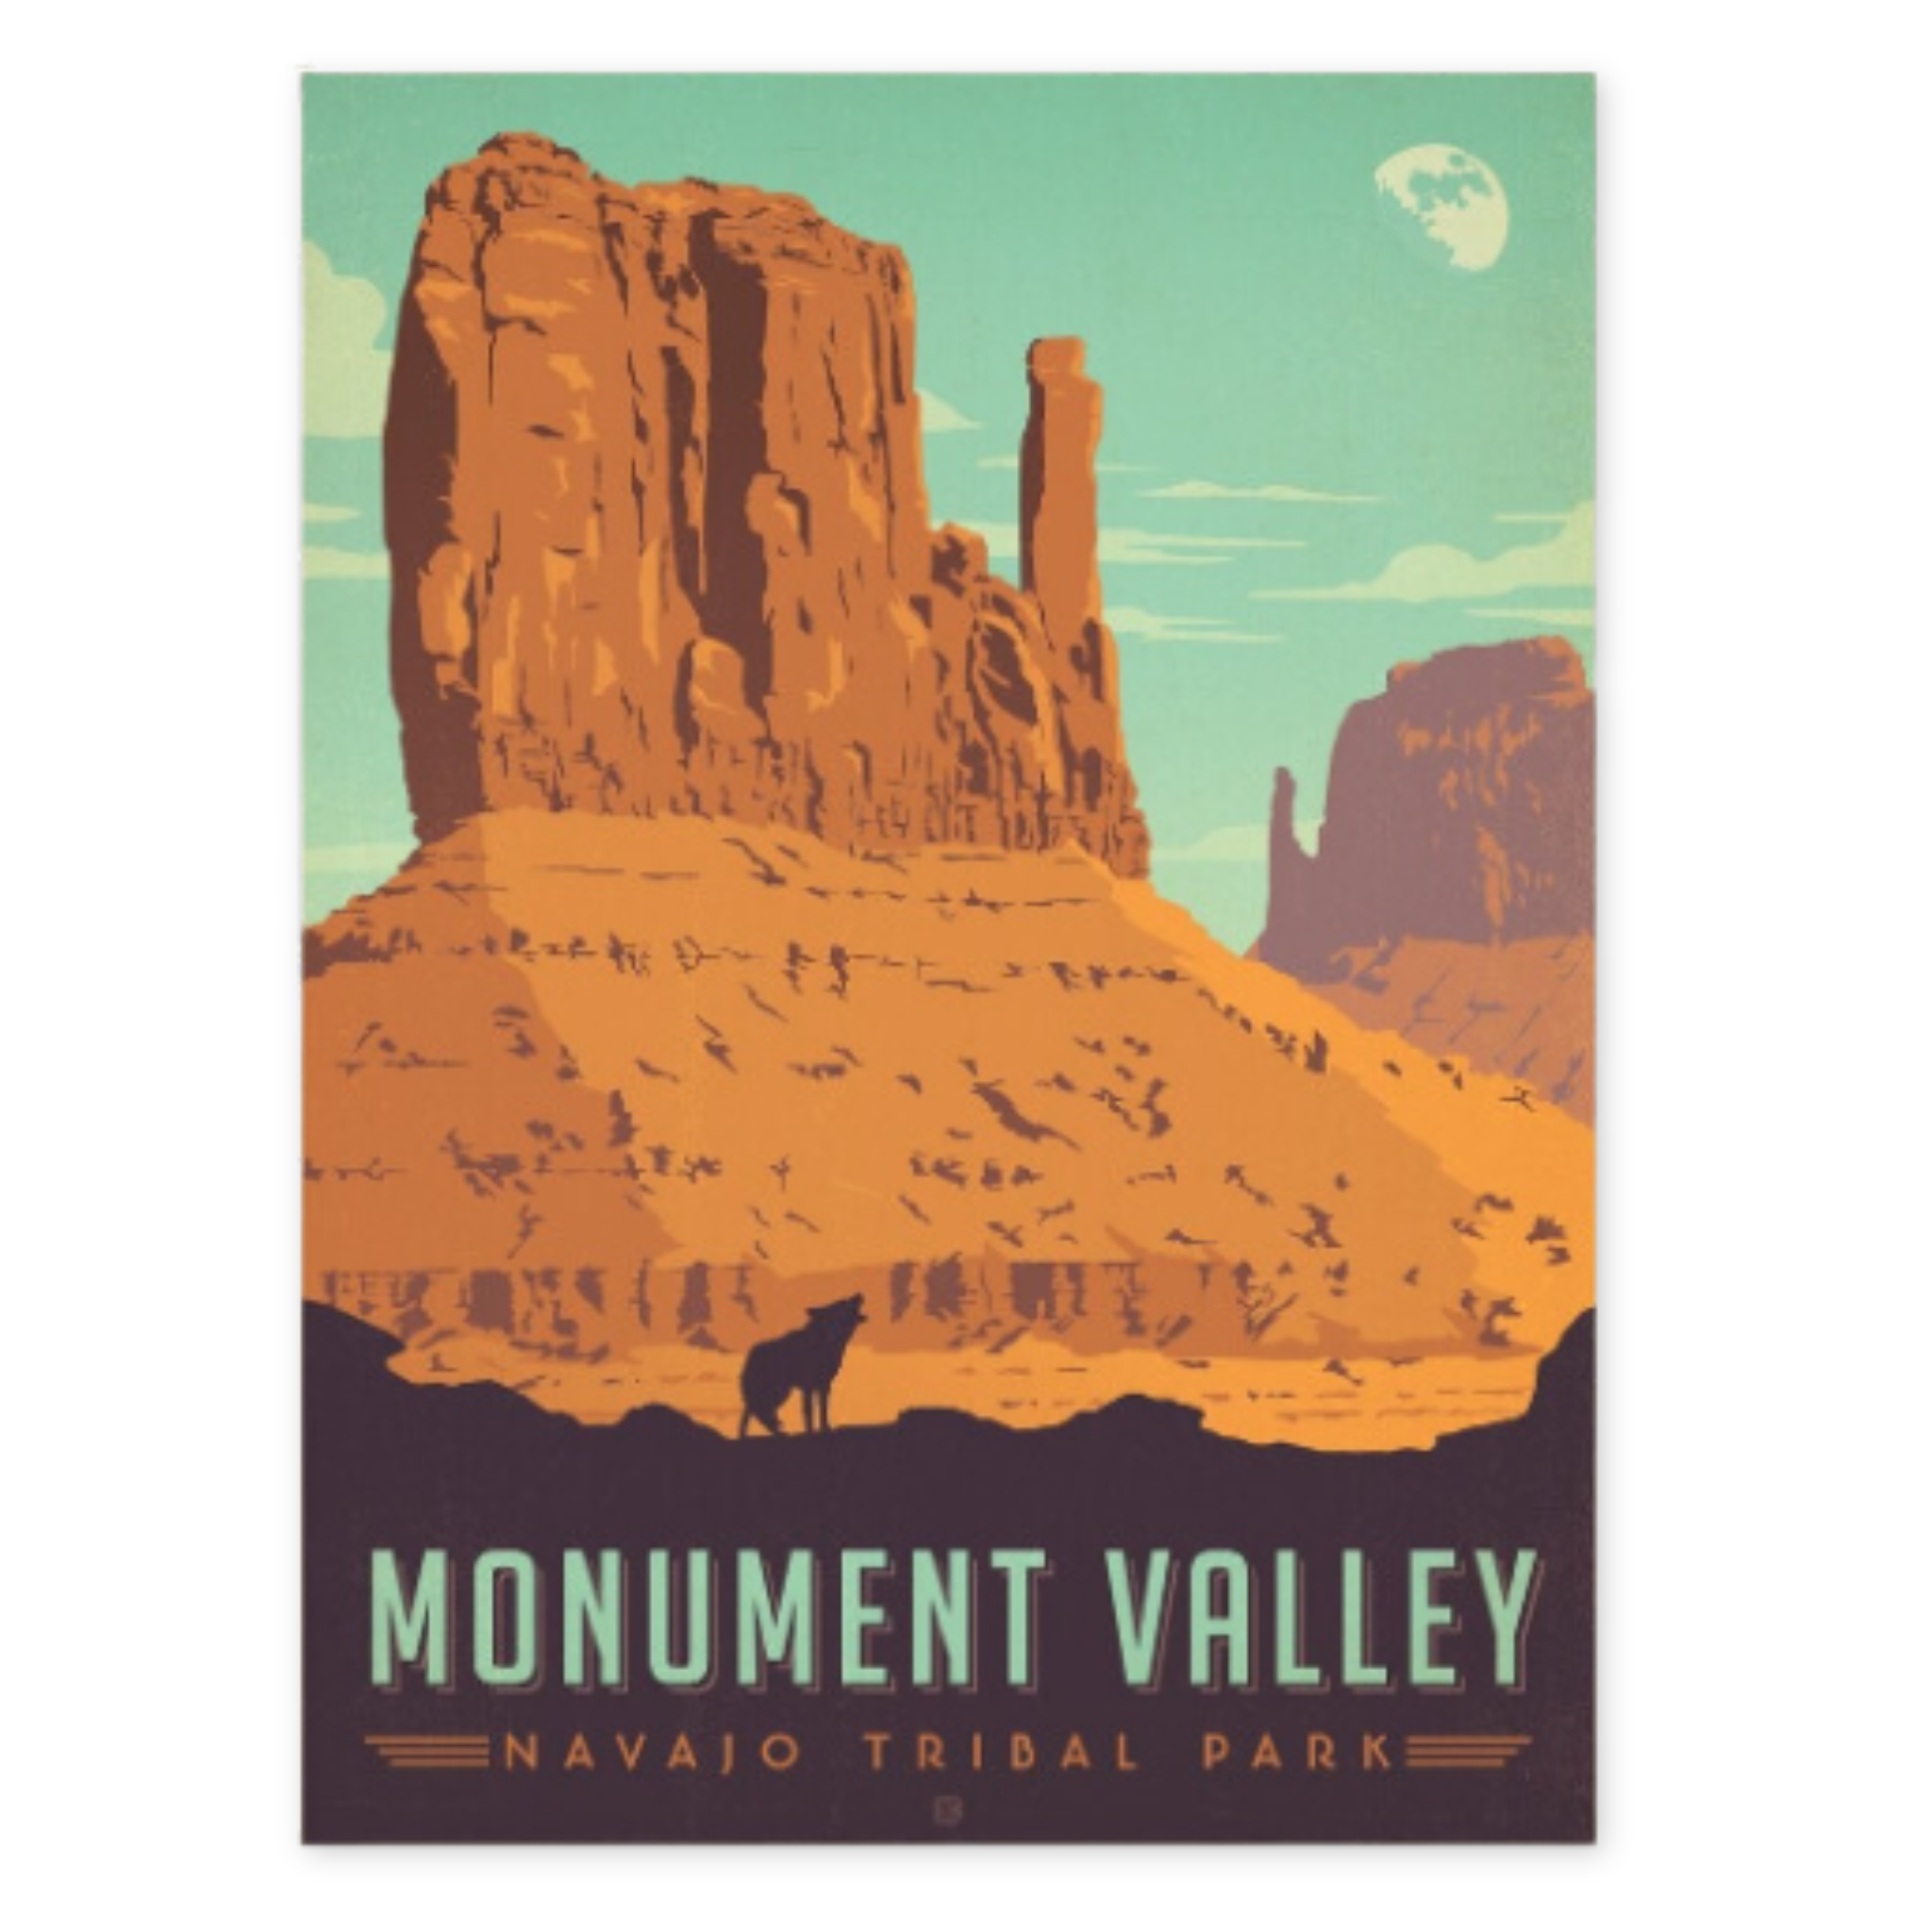 print of navajo tribal park with image of momument valley